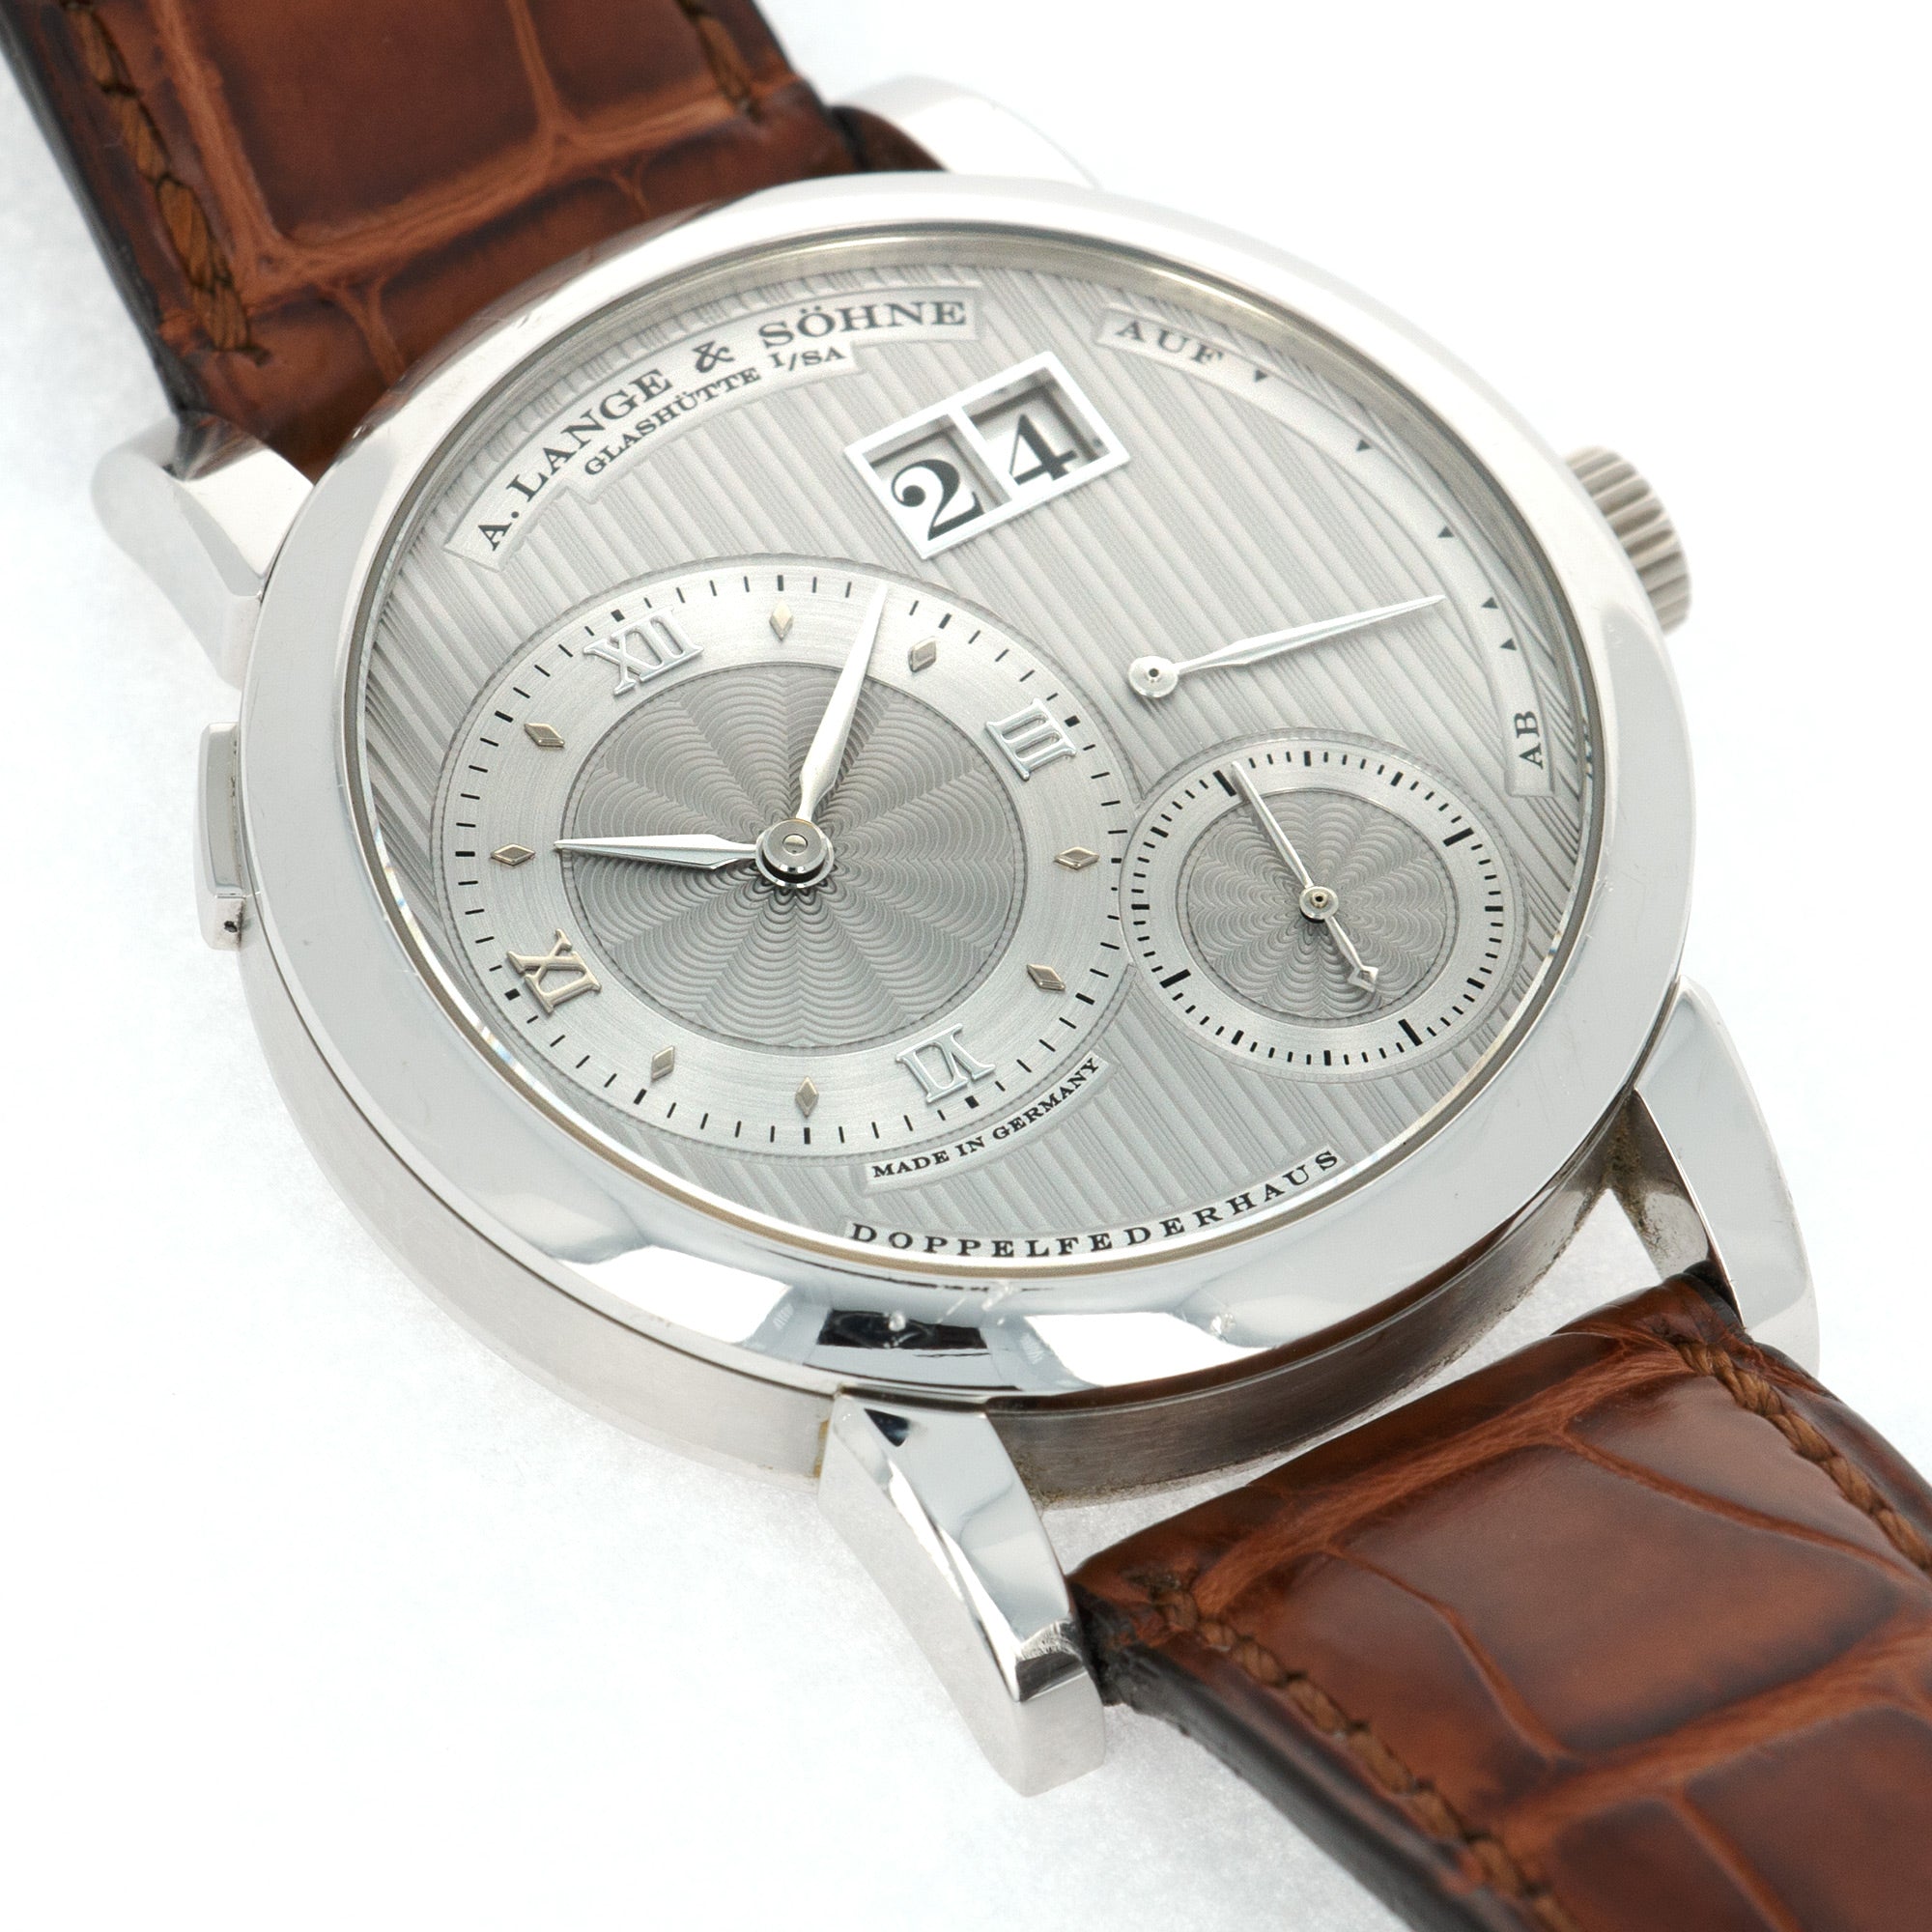 A. Lange & Sohne - A. Lange & Sohne Platinum Lange One for Sincere Singapore Ref. 112.049 - The Keystone Watches